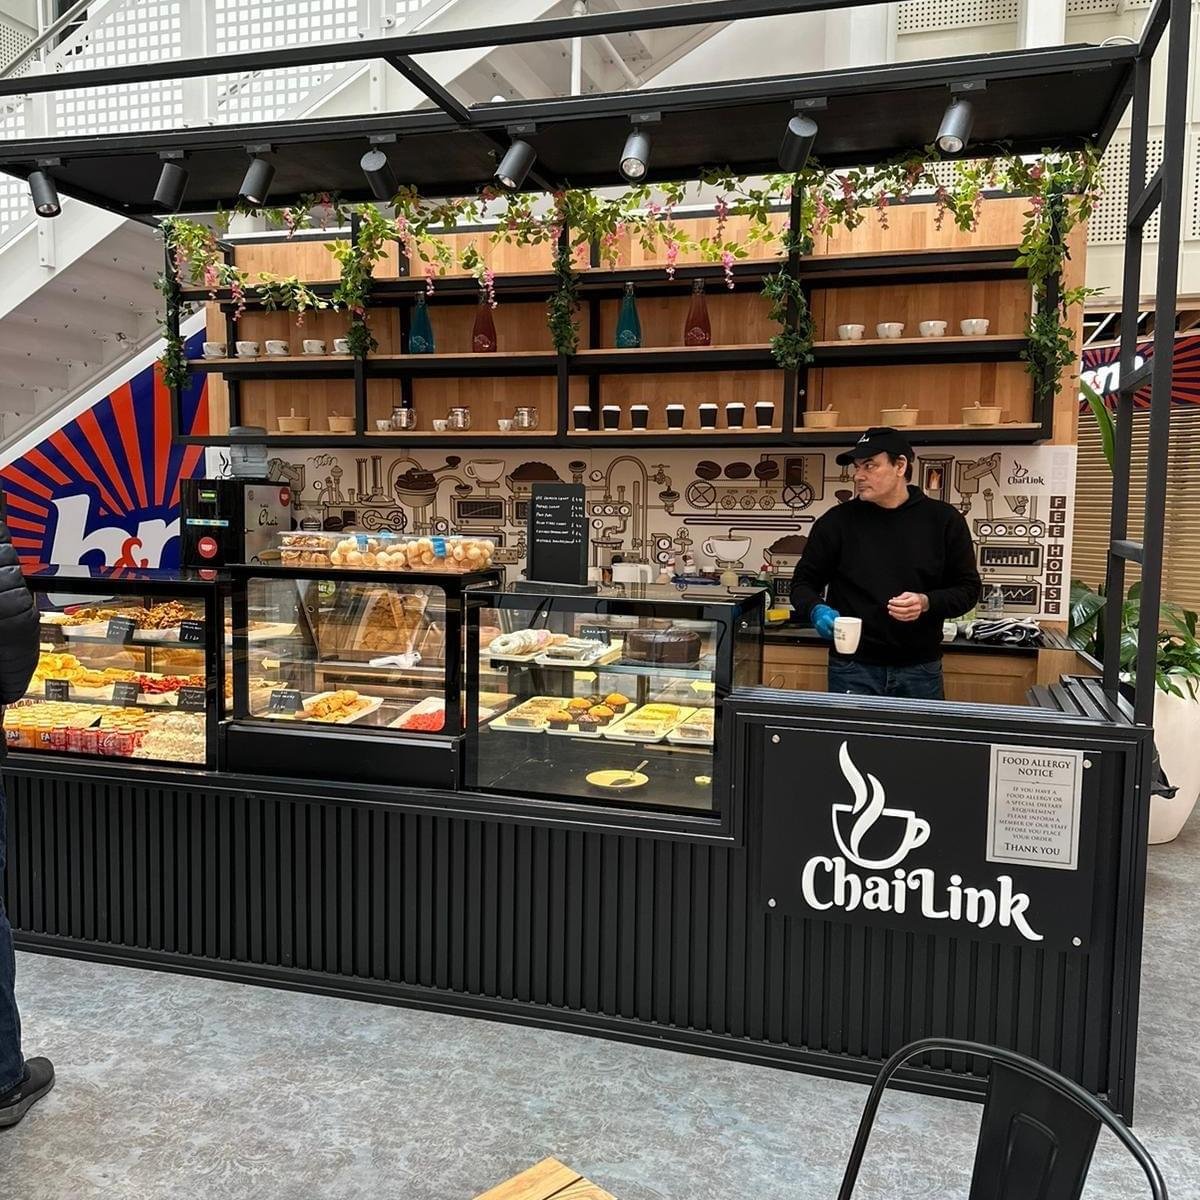 ☕️ Craving a coffee and a delightful treat? Look no further! ☕️

Introducing Chai Link, your new go-to destination for a perfect pick-me-up! Swing by their kiosk today, located in the Marlowes, South Mall, by H.Samuel. 

#ChaiLink #CoffeeLovers #Marl